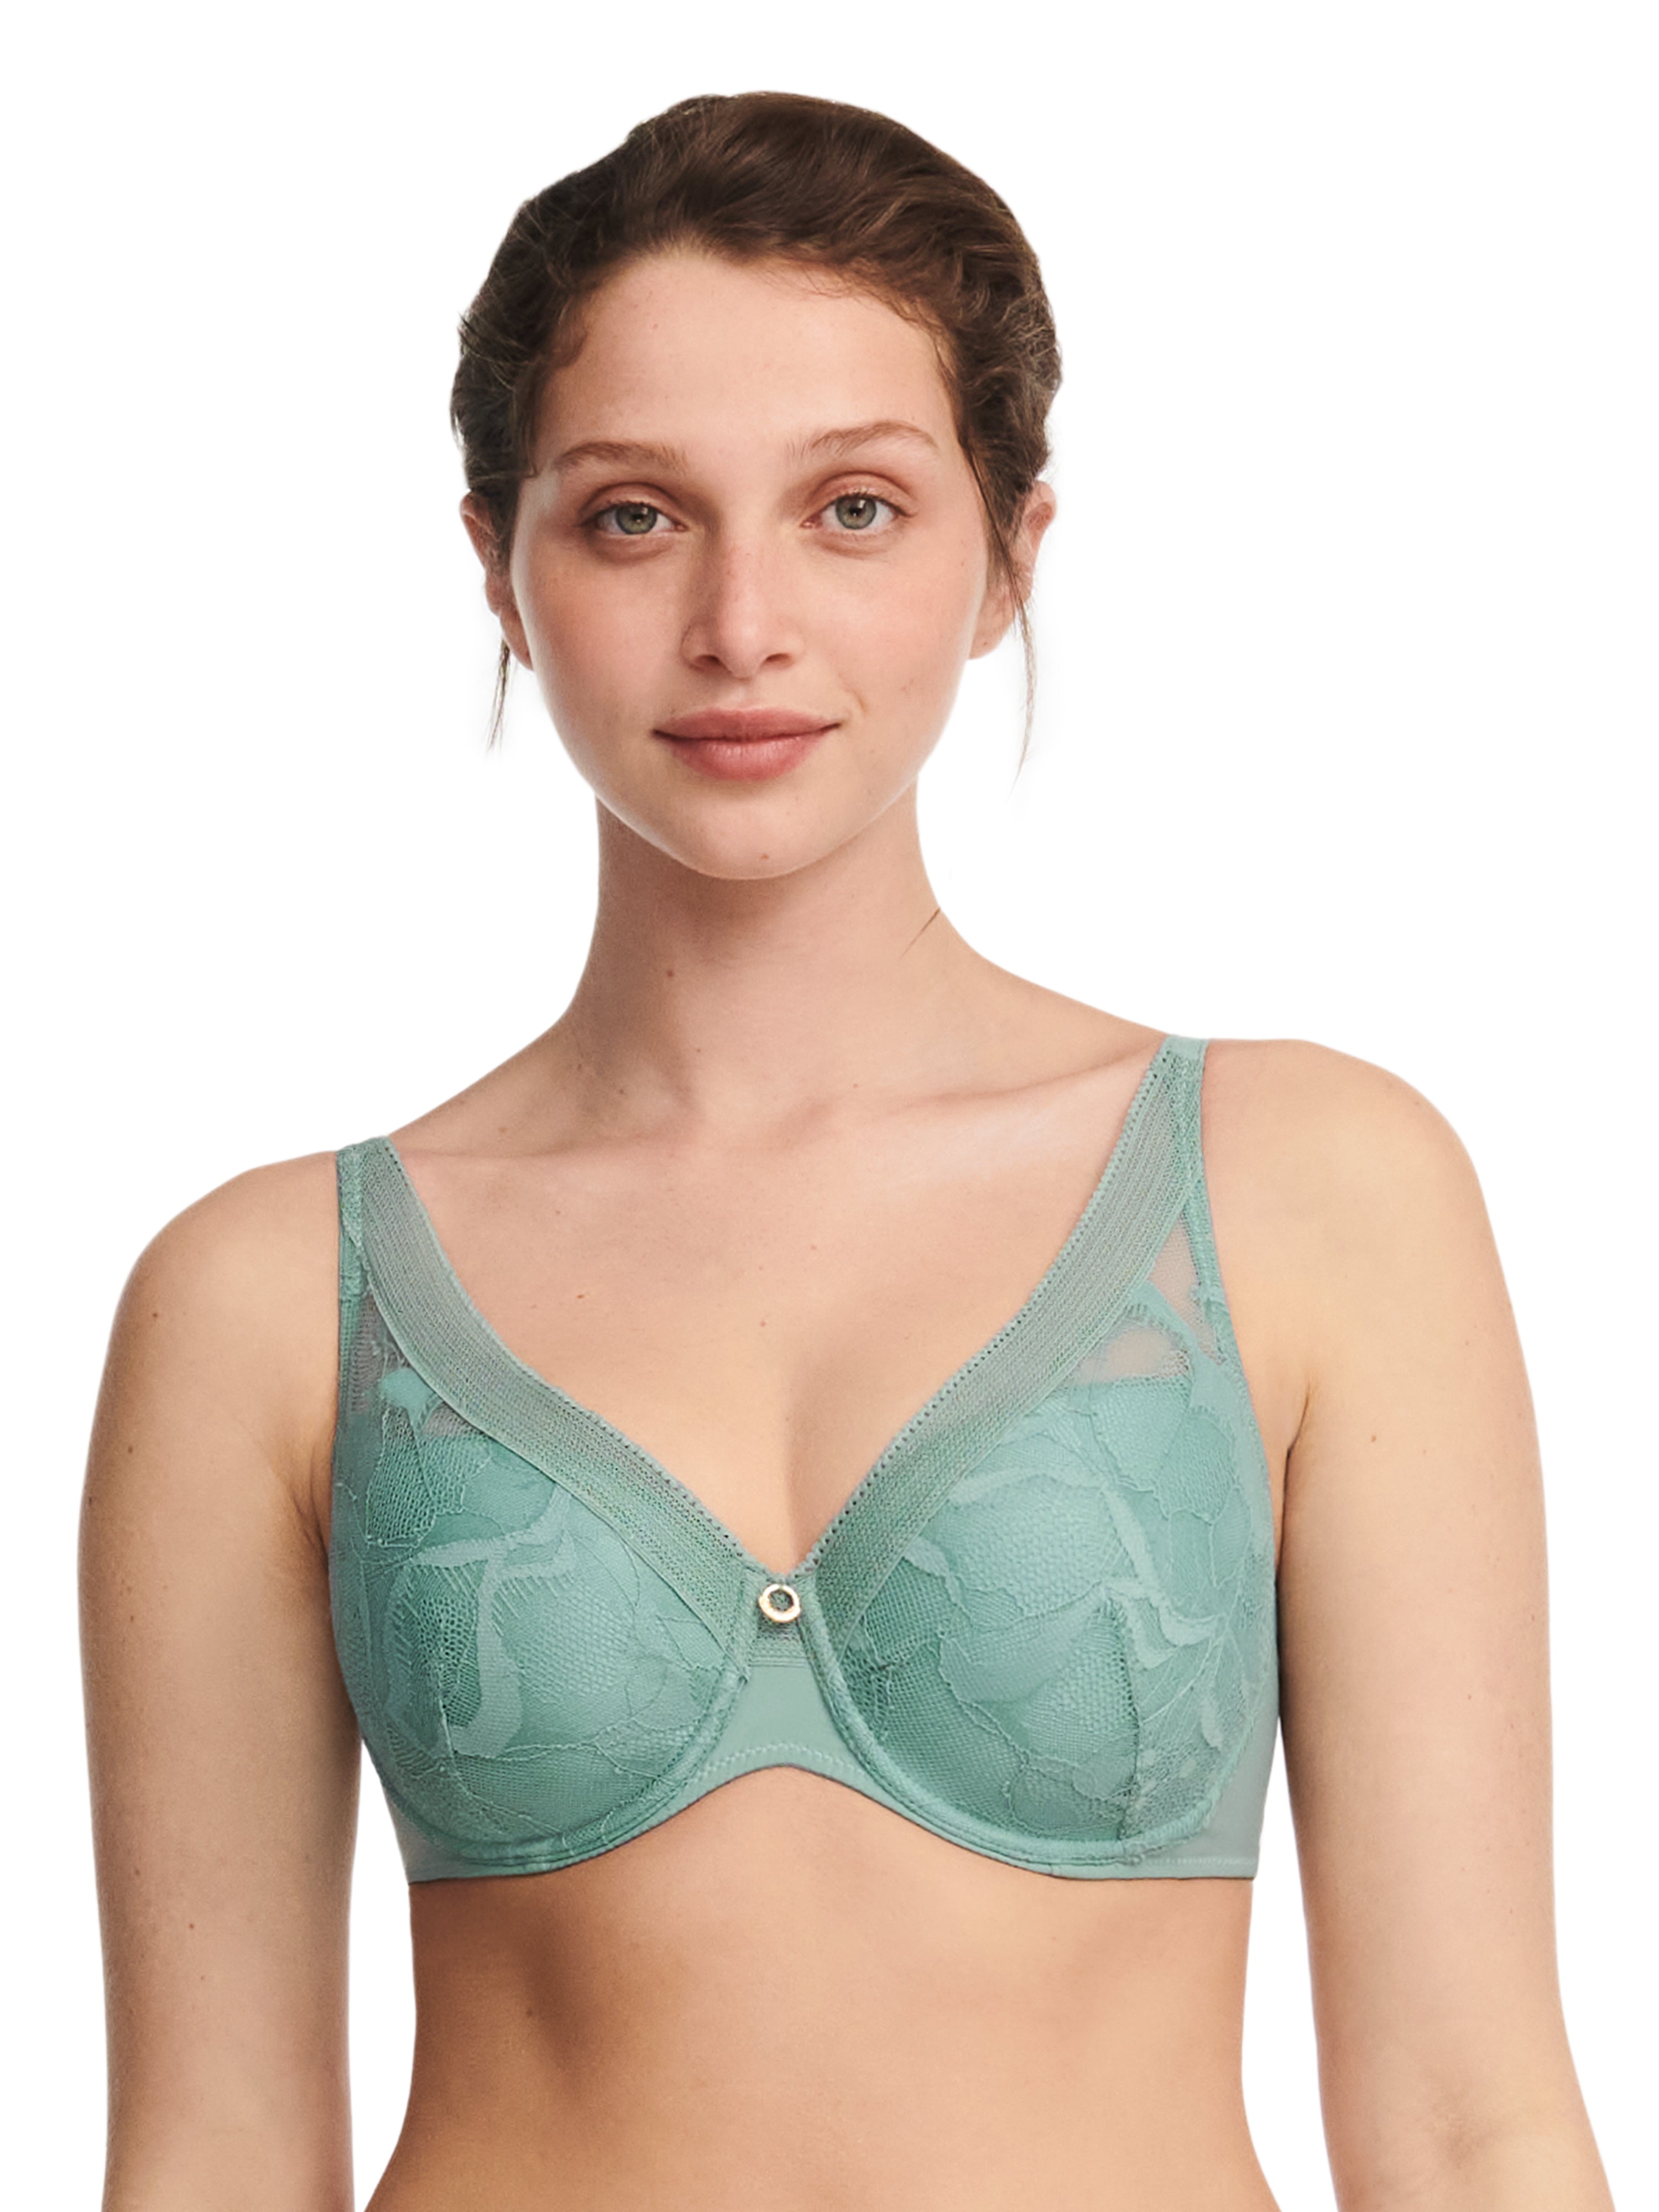 Bra Spacer Tulle Non Padded Underwire C and D Cup Chantelle 1296